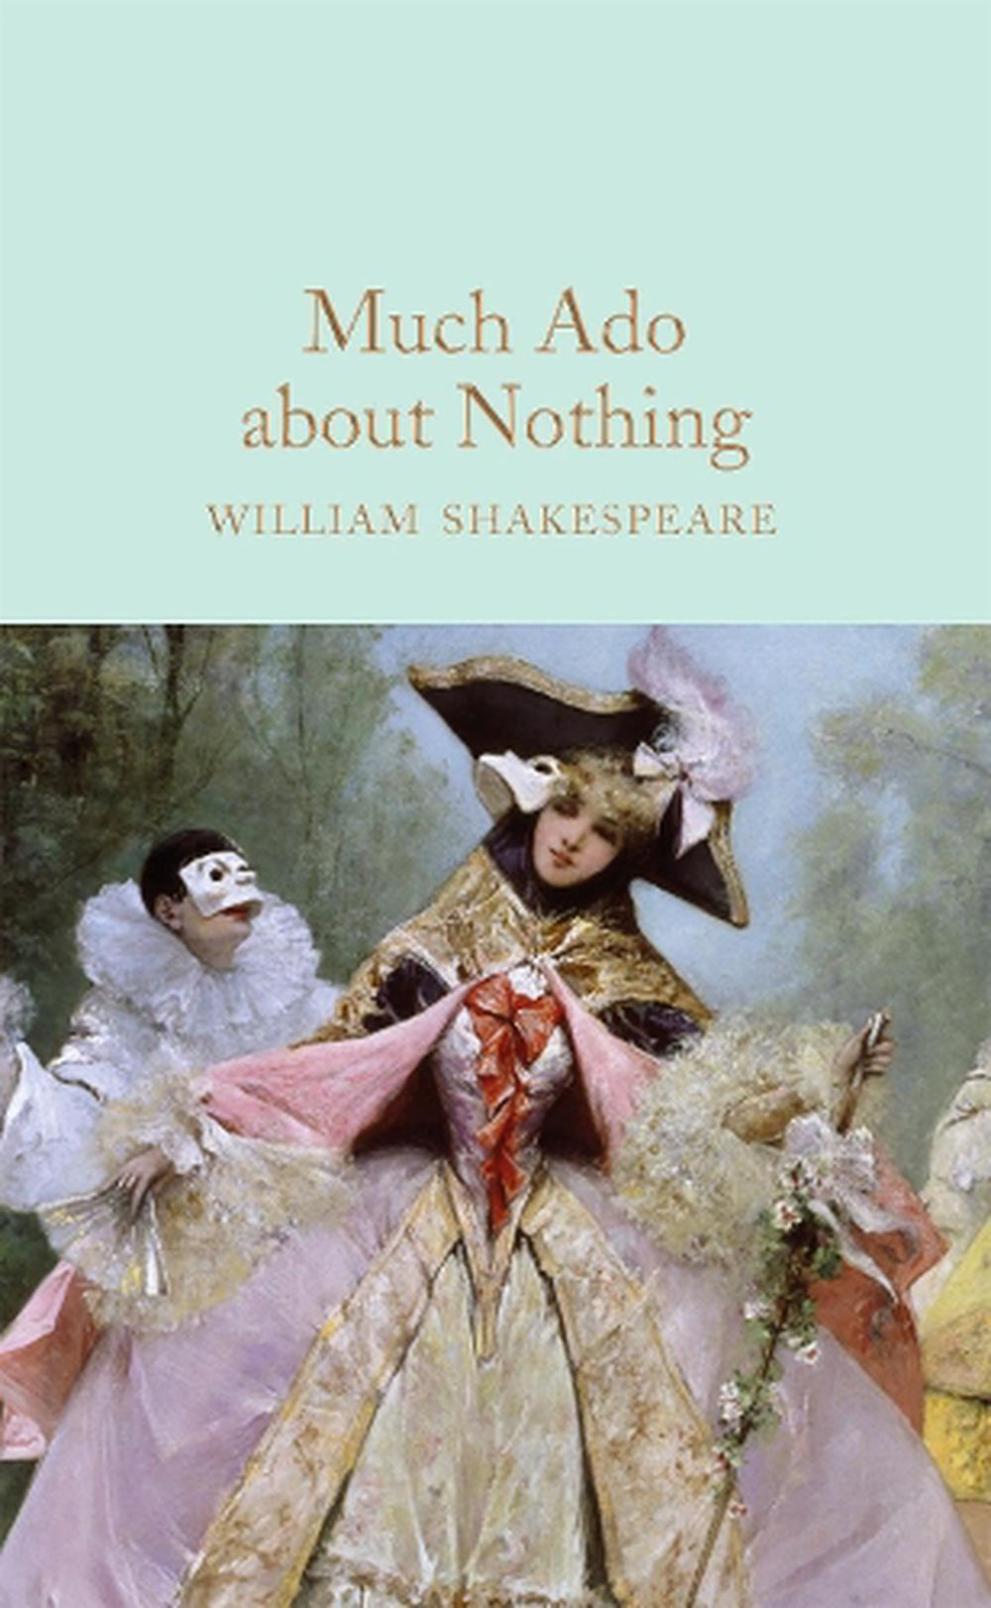 How Does Shakespeare Use Wordplay and Puns to Create Humor in Much Ado About Nothing?